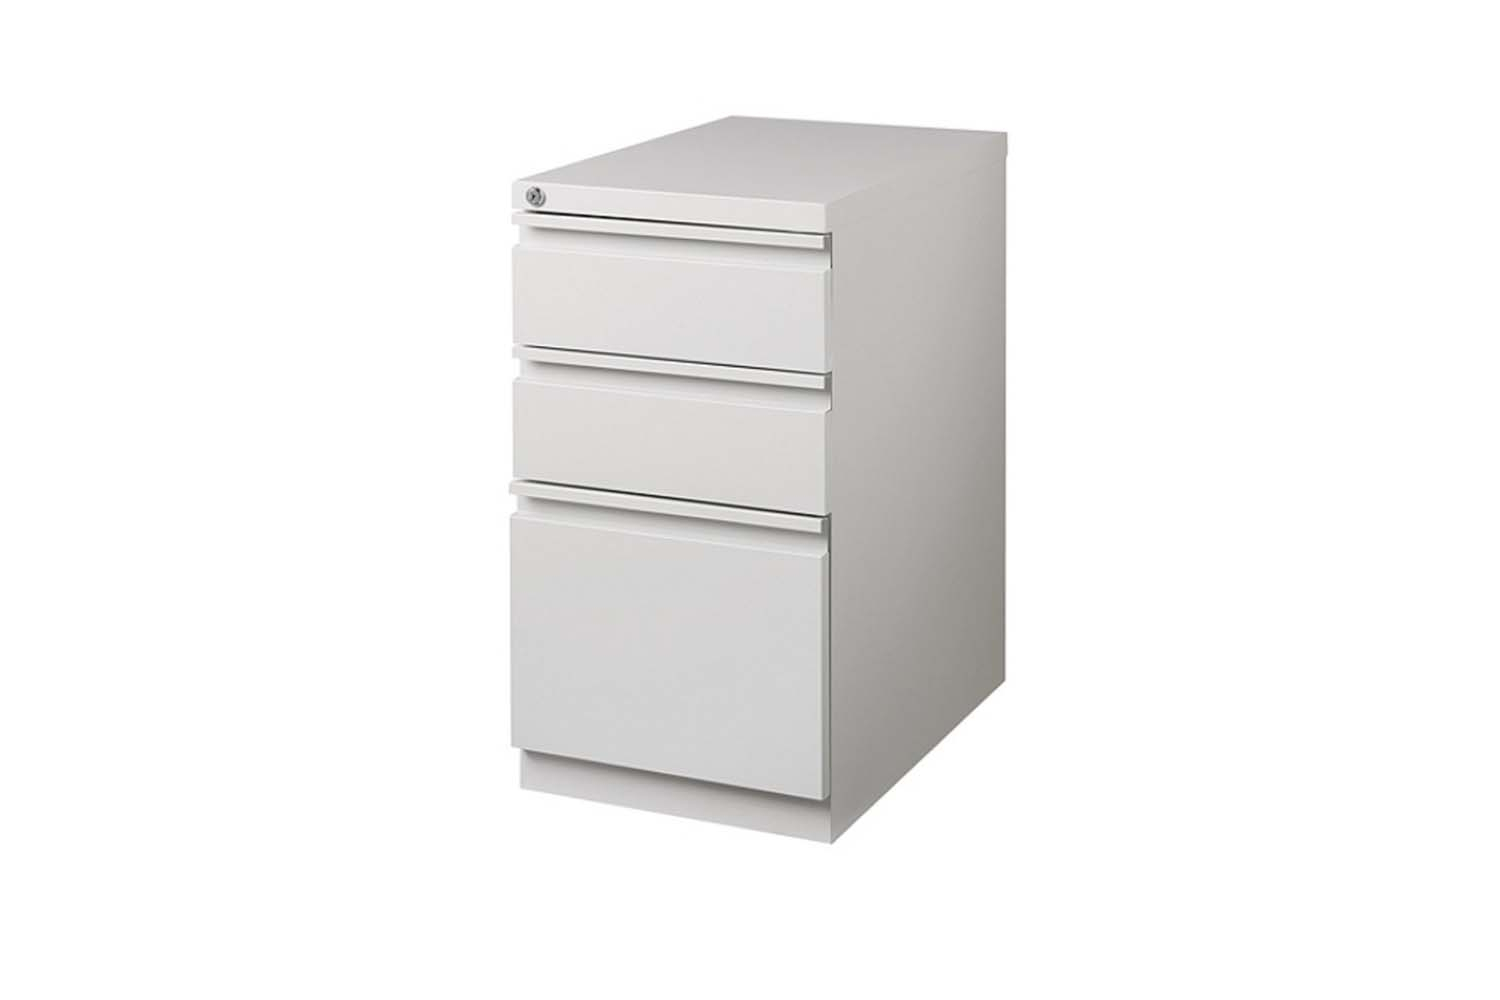 Workpro 20 In D 3 Drawer Vertical Mobile Pedestal File Cabinet in size 1500 X 1000